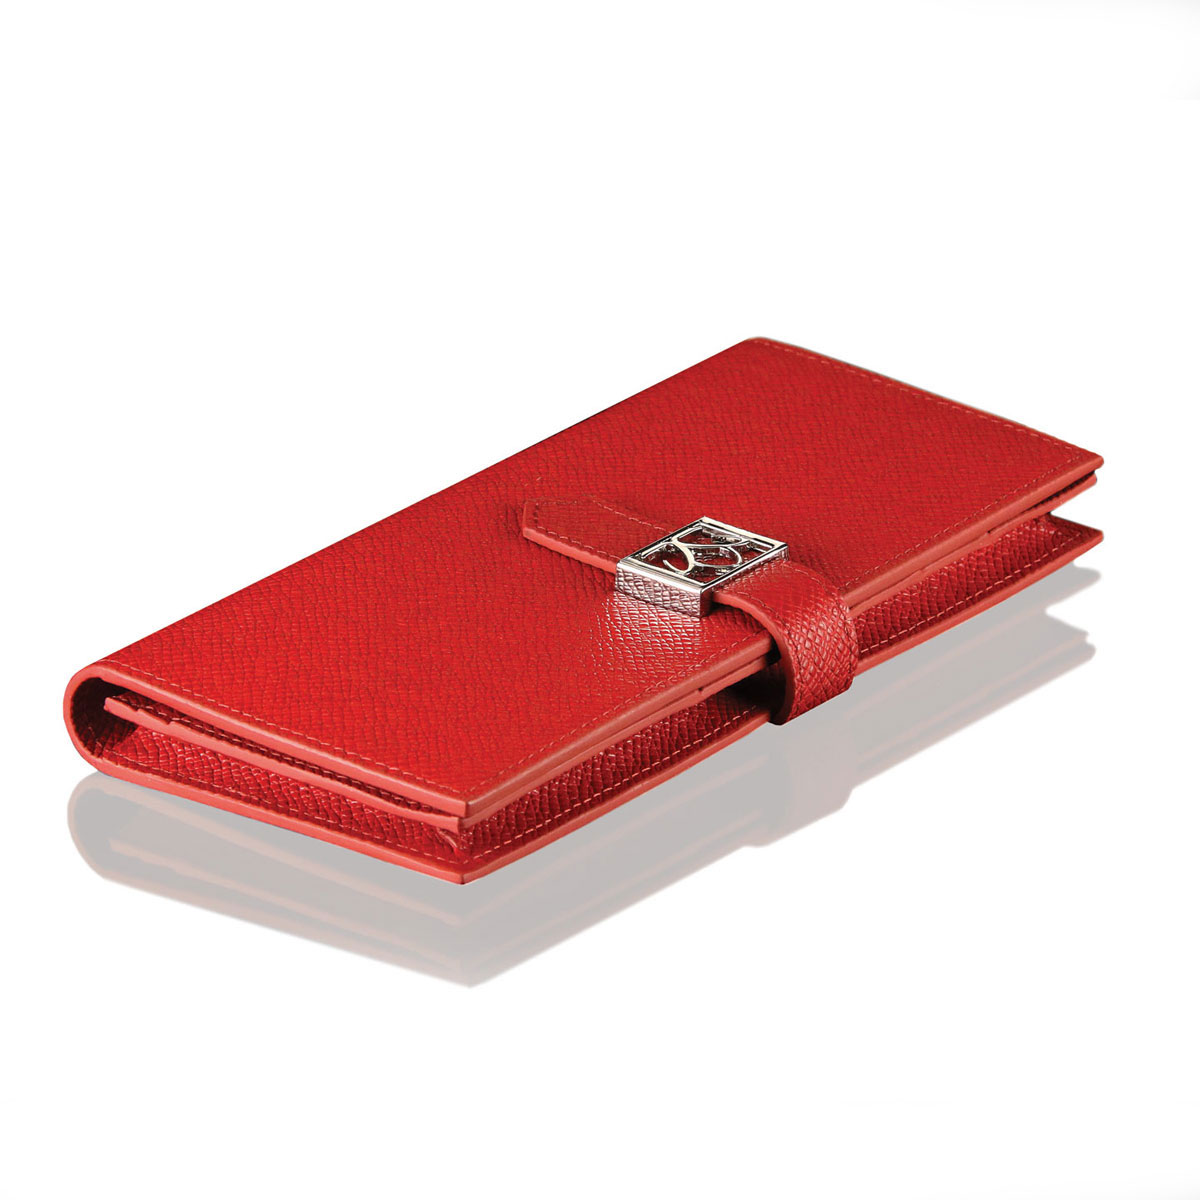 Cashs Ireland, Top Grain Leather Red Avondale Wallet